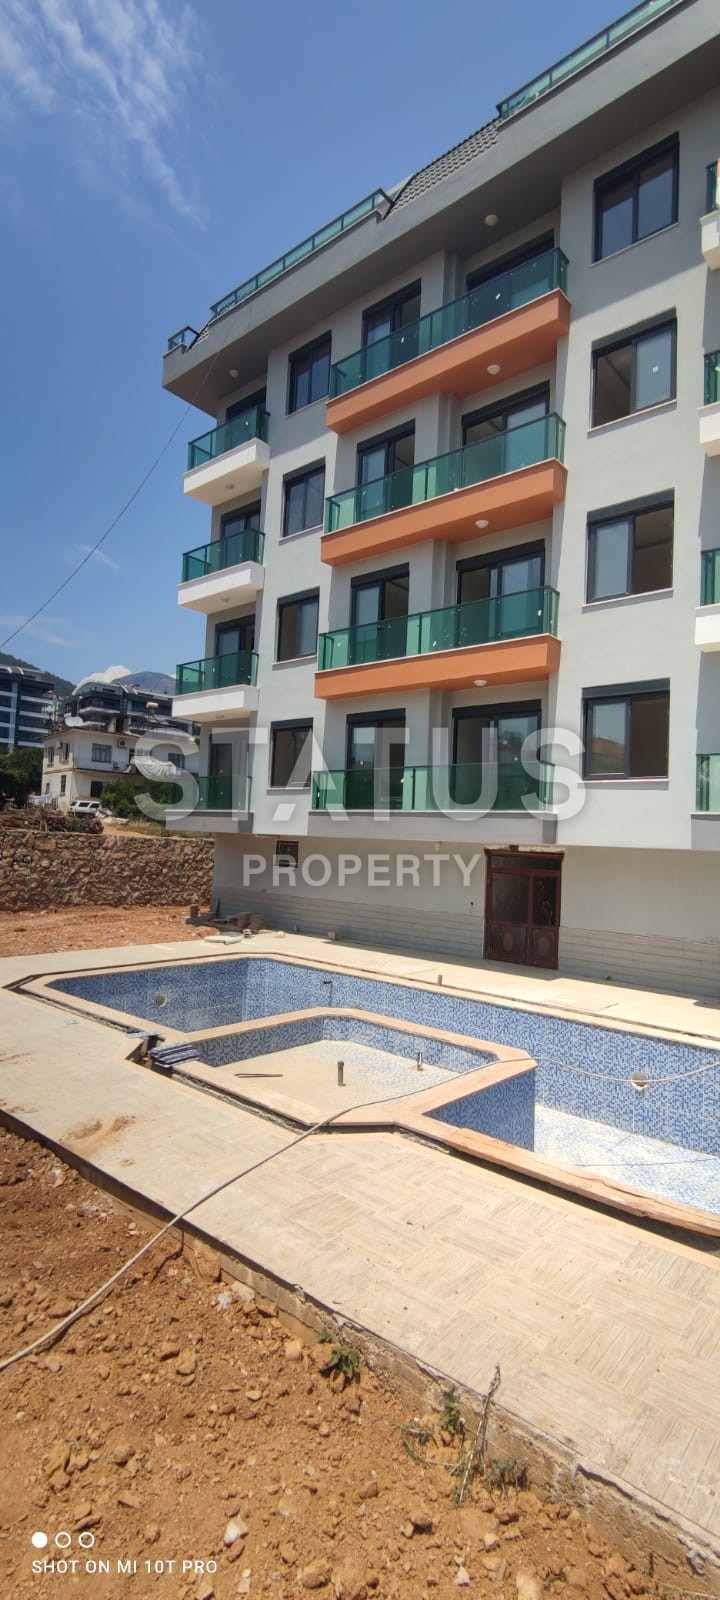 One-bedroom apartment at an attractive price in OBA. 55m2 фото 1